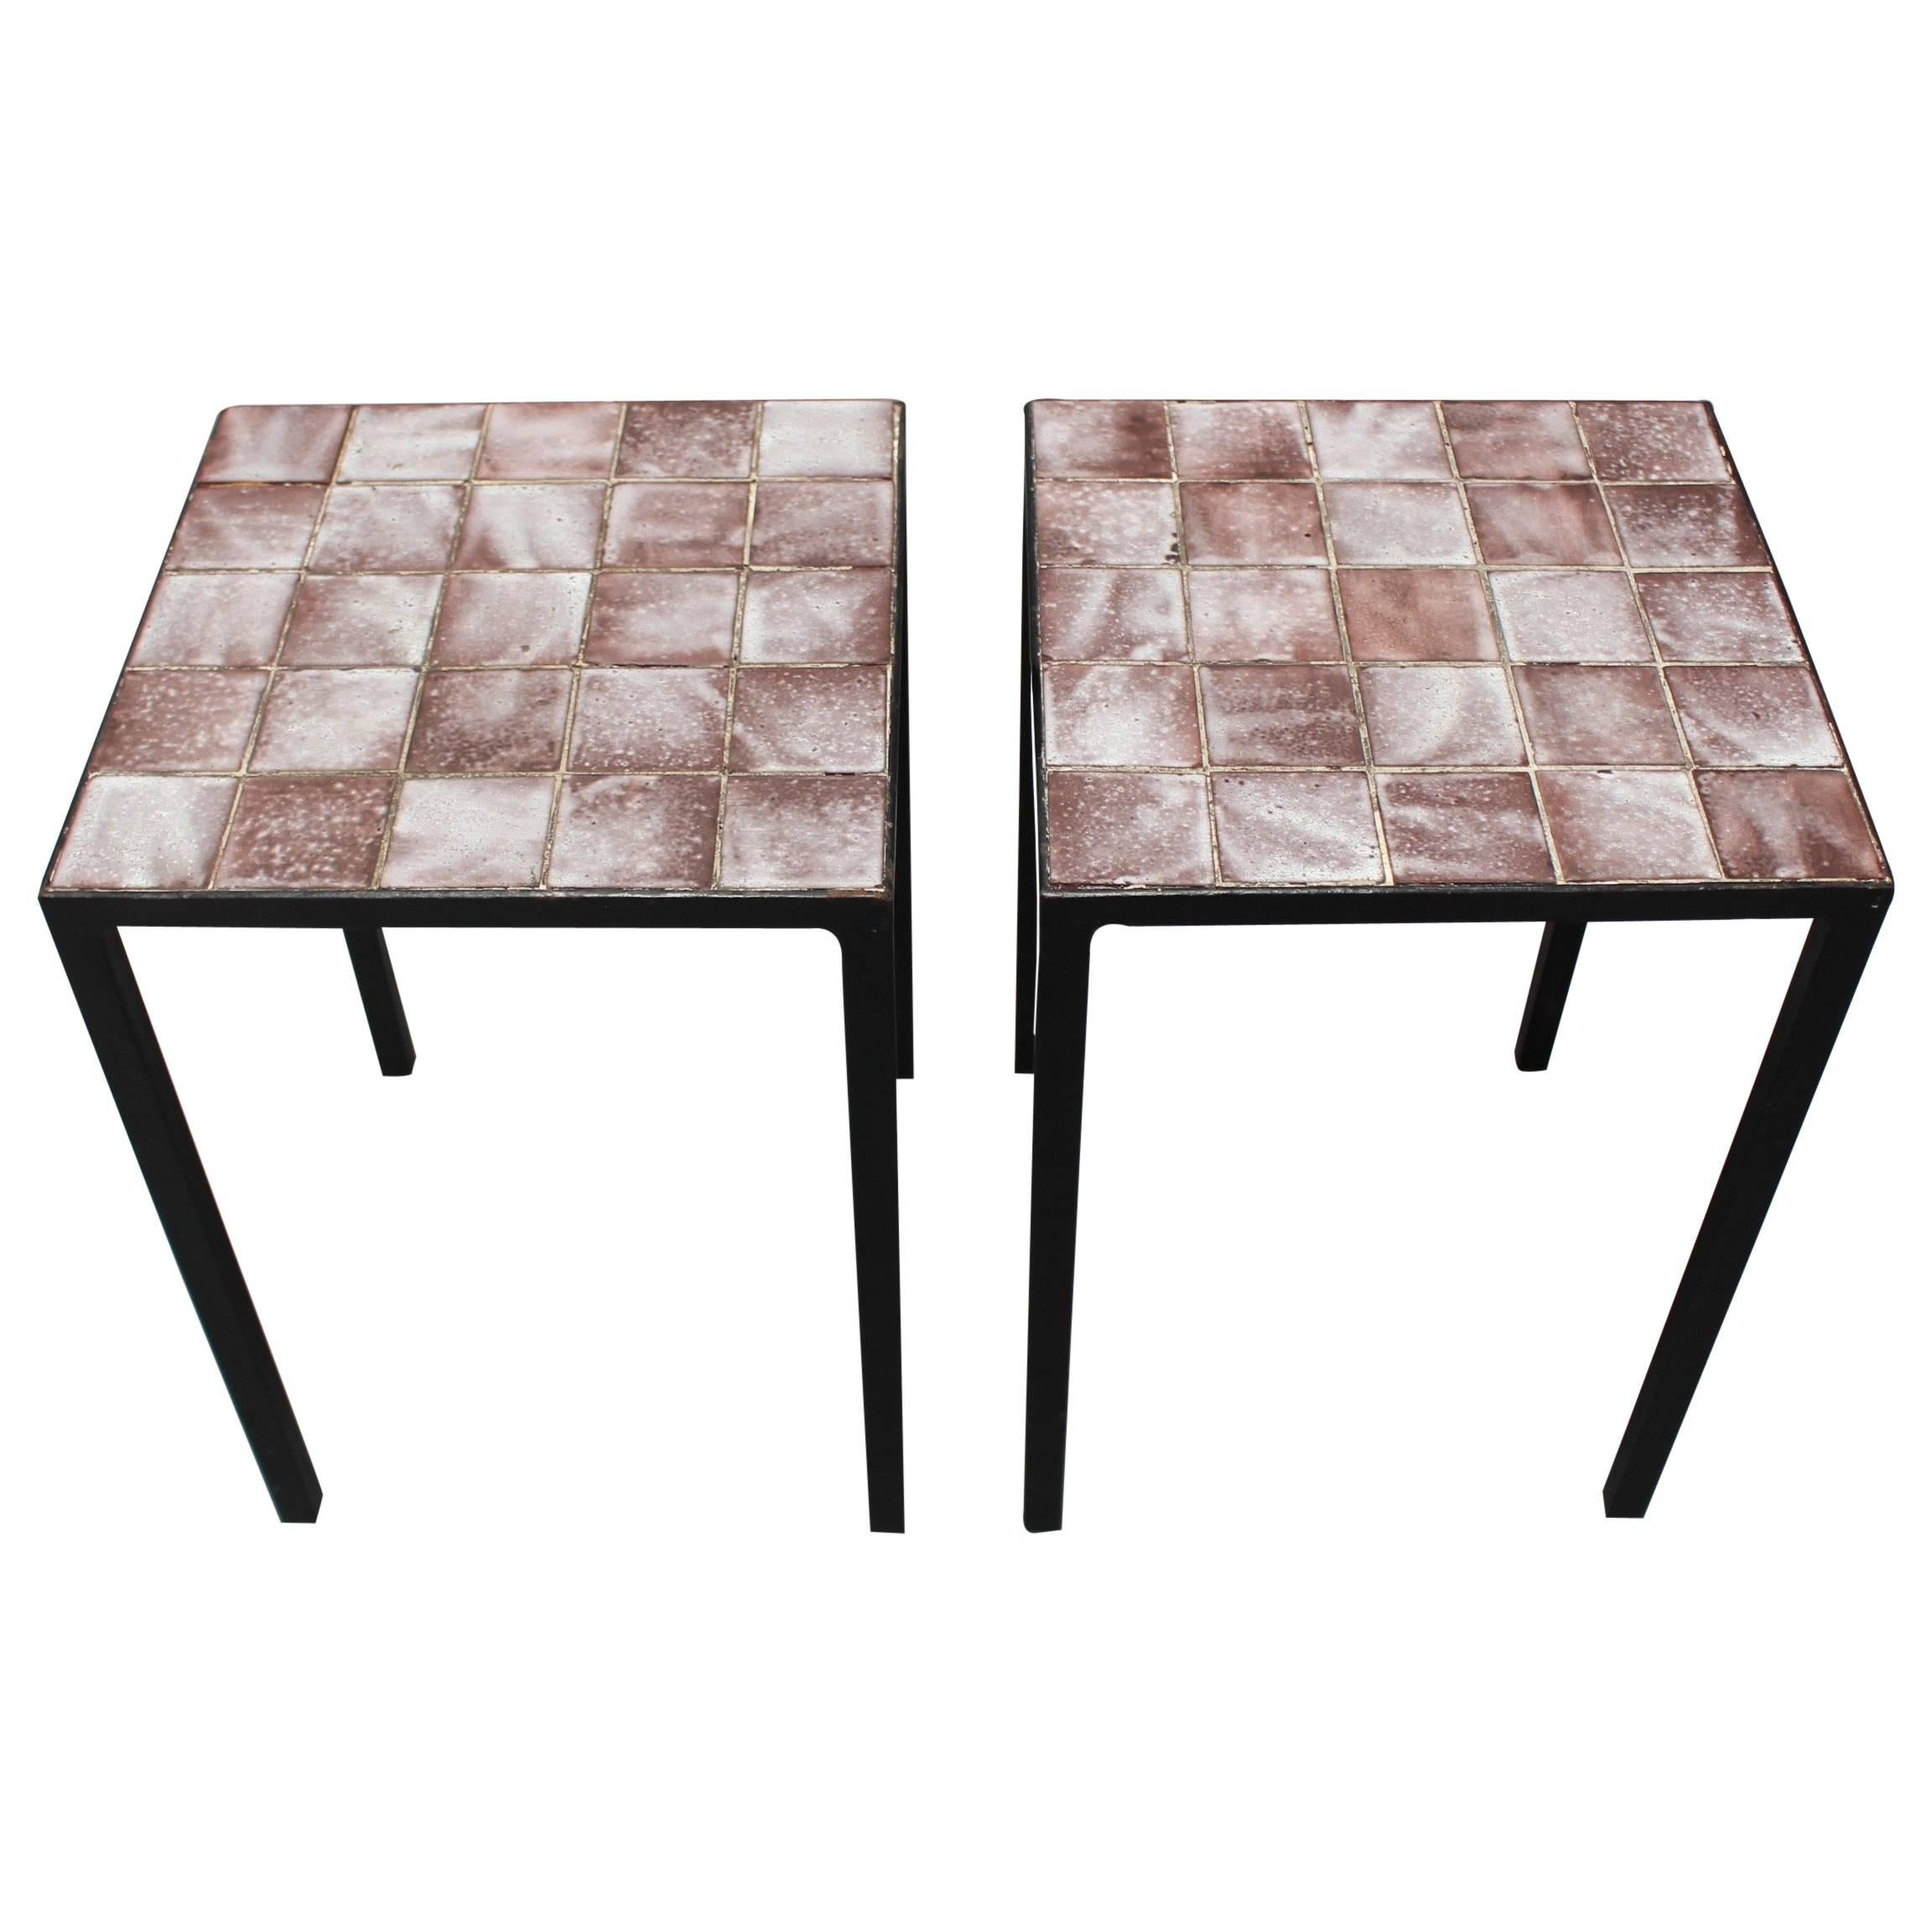 Set of Two Purple Ceramic Tiled Side Tables by Mado Jolain, circa 1950s -1960s